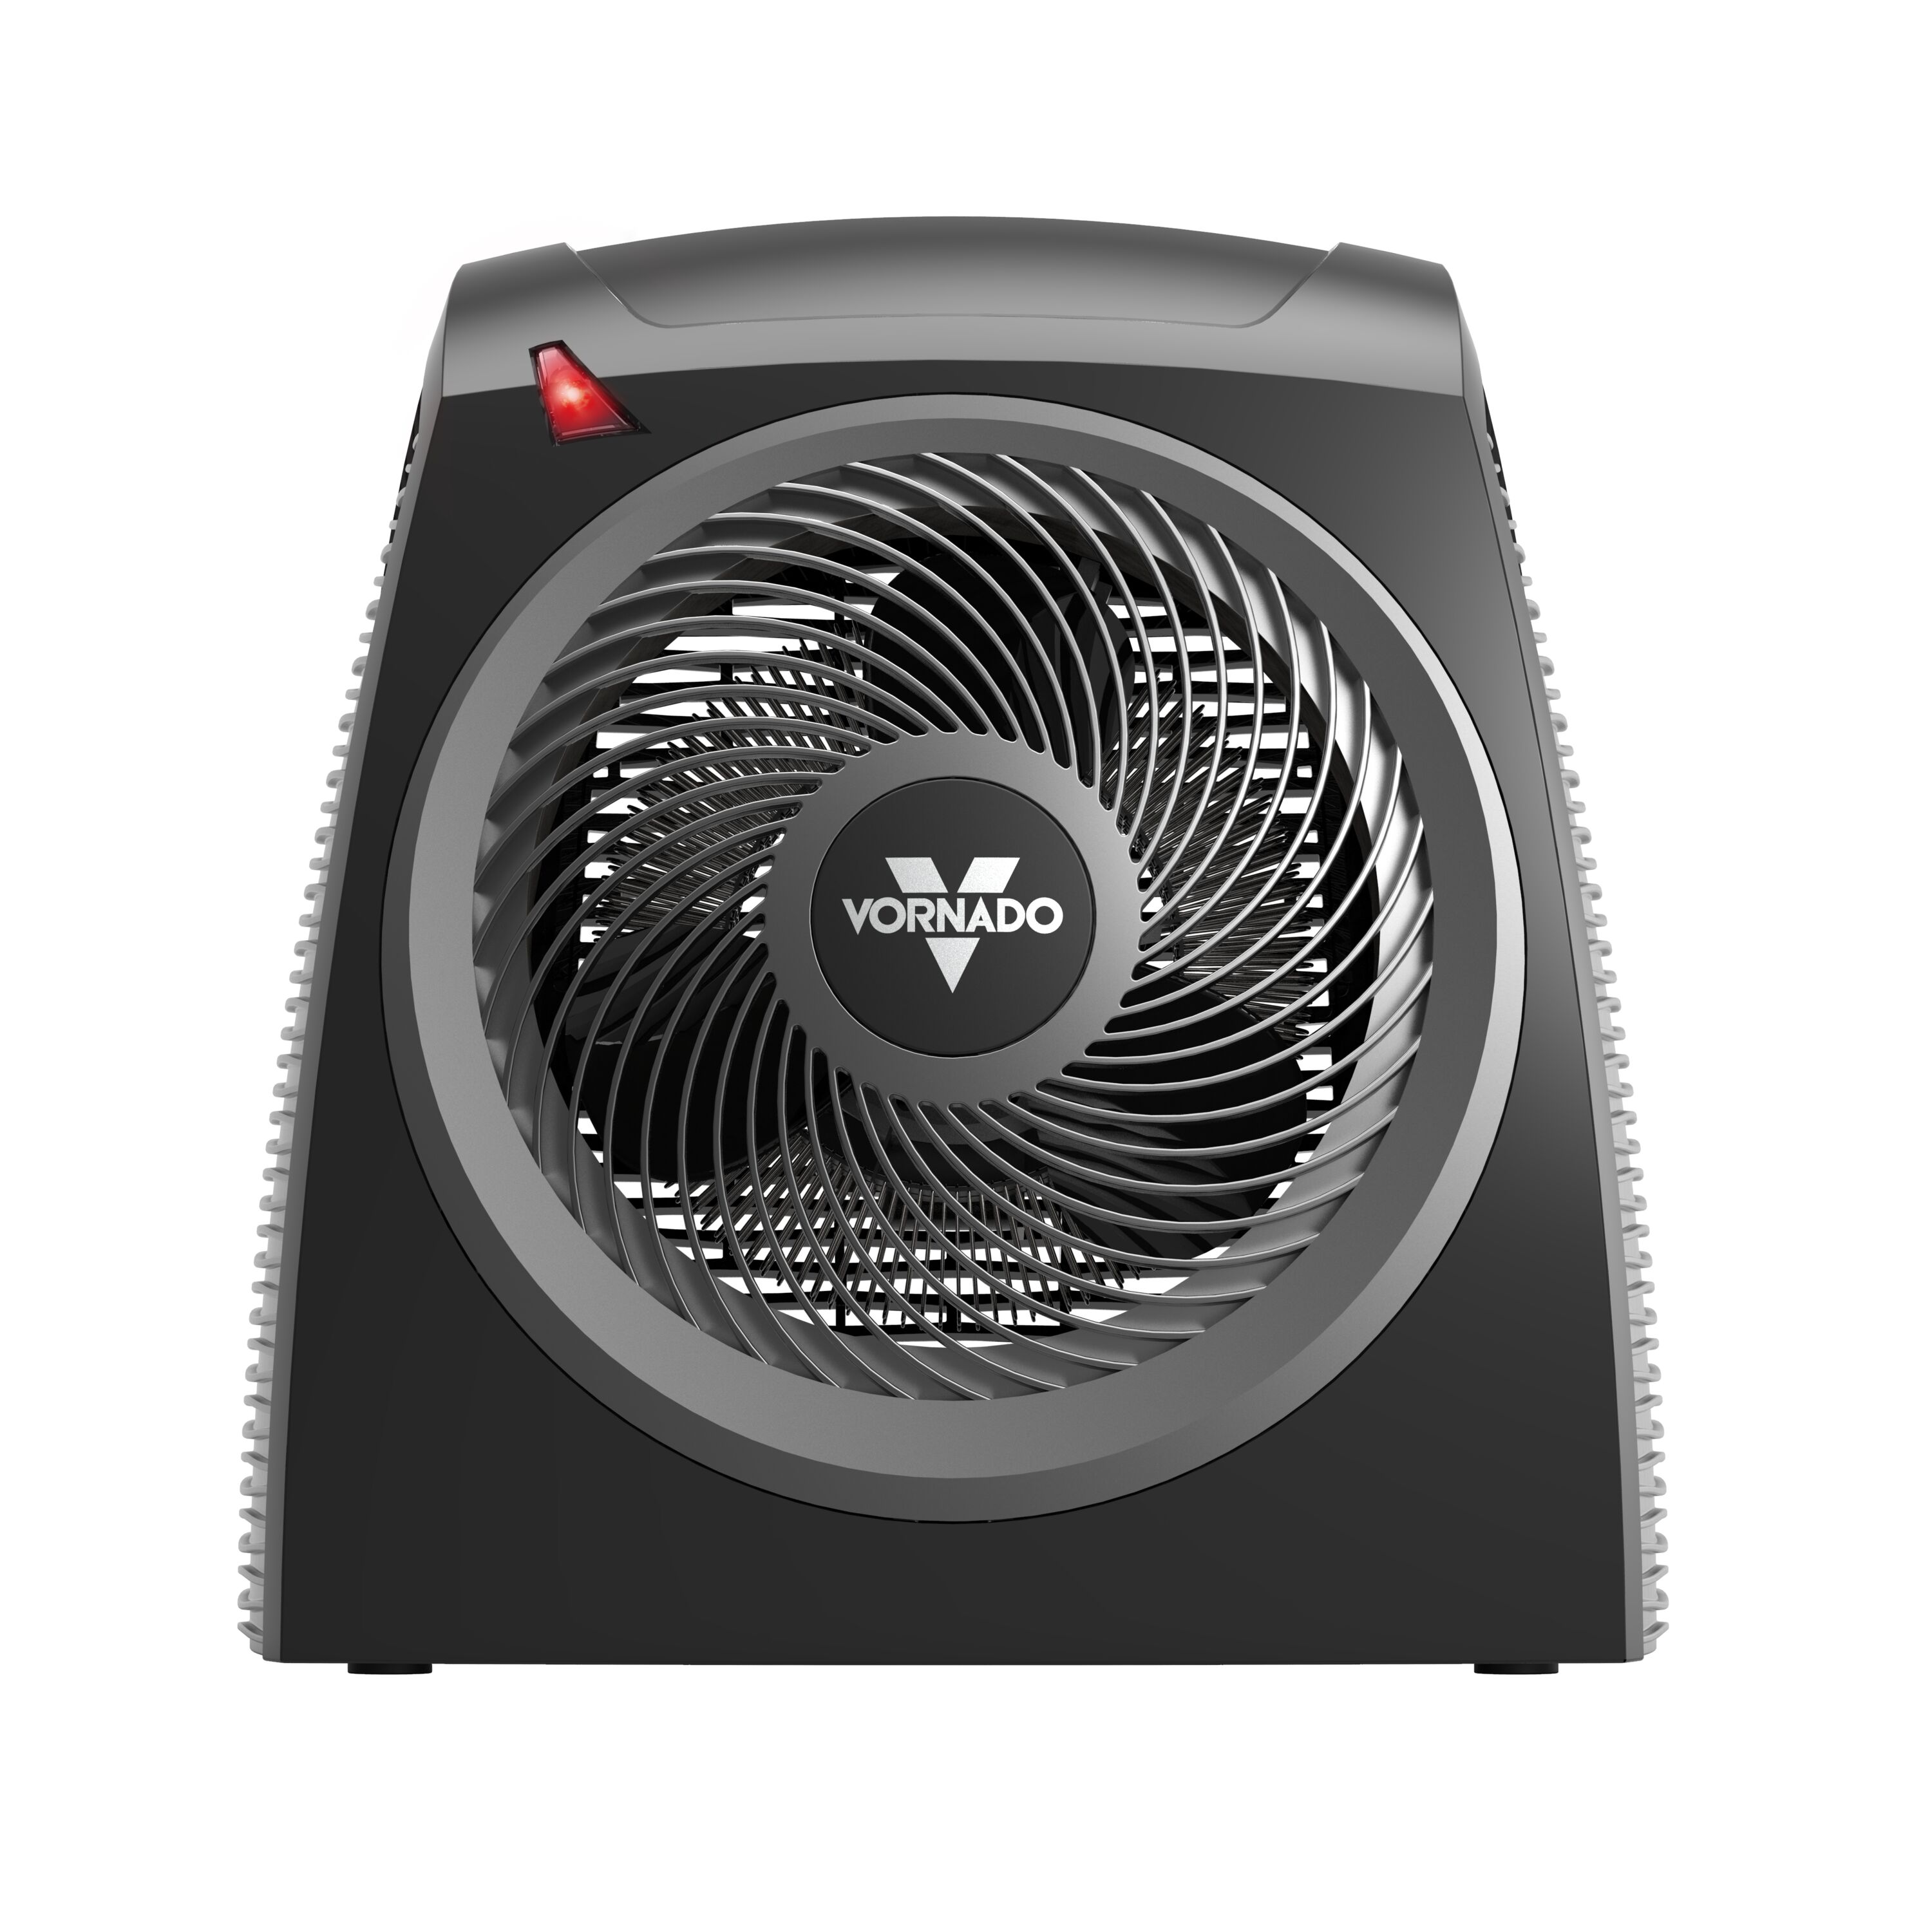 Vornado Up to 1500-Watt Fan Compact Personal Indoor Electric Space Heater with Thermostat and 